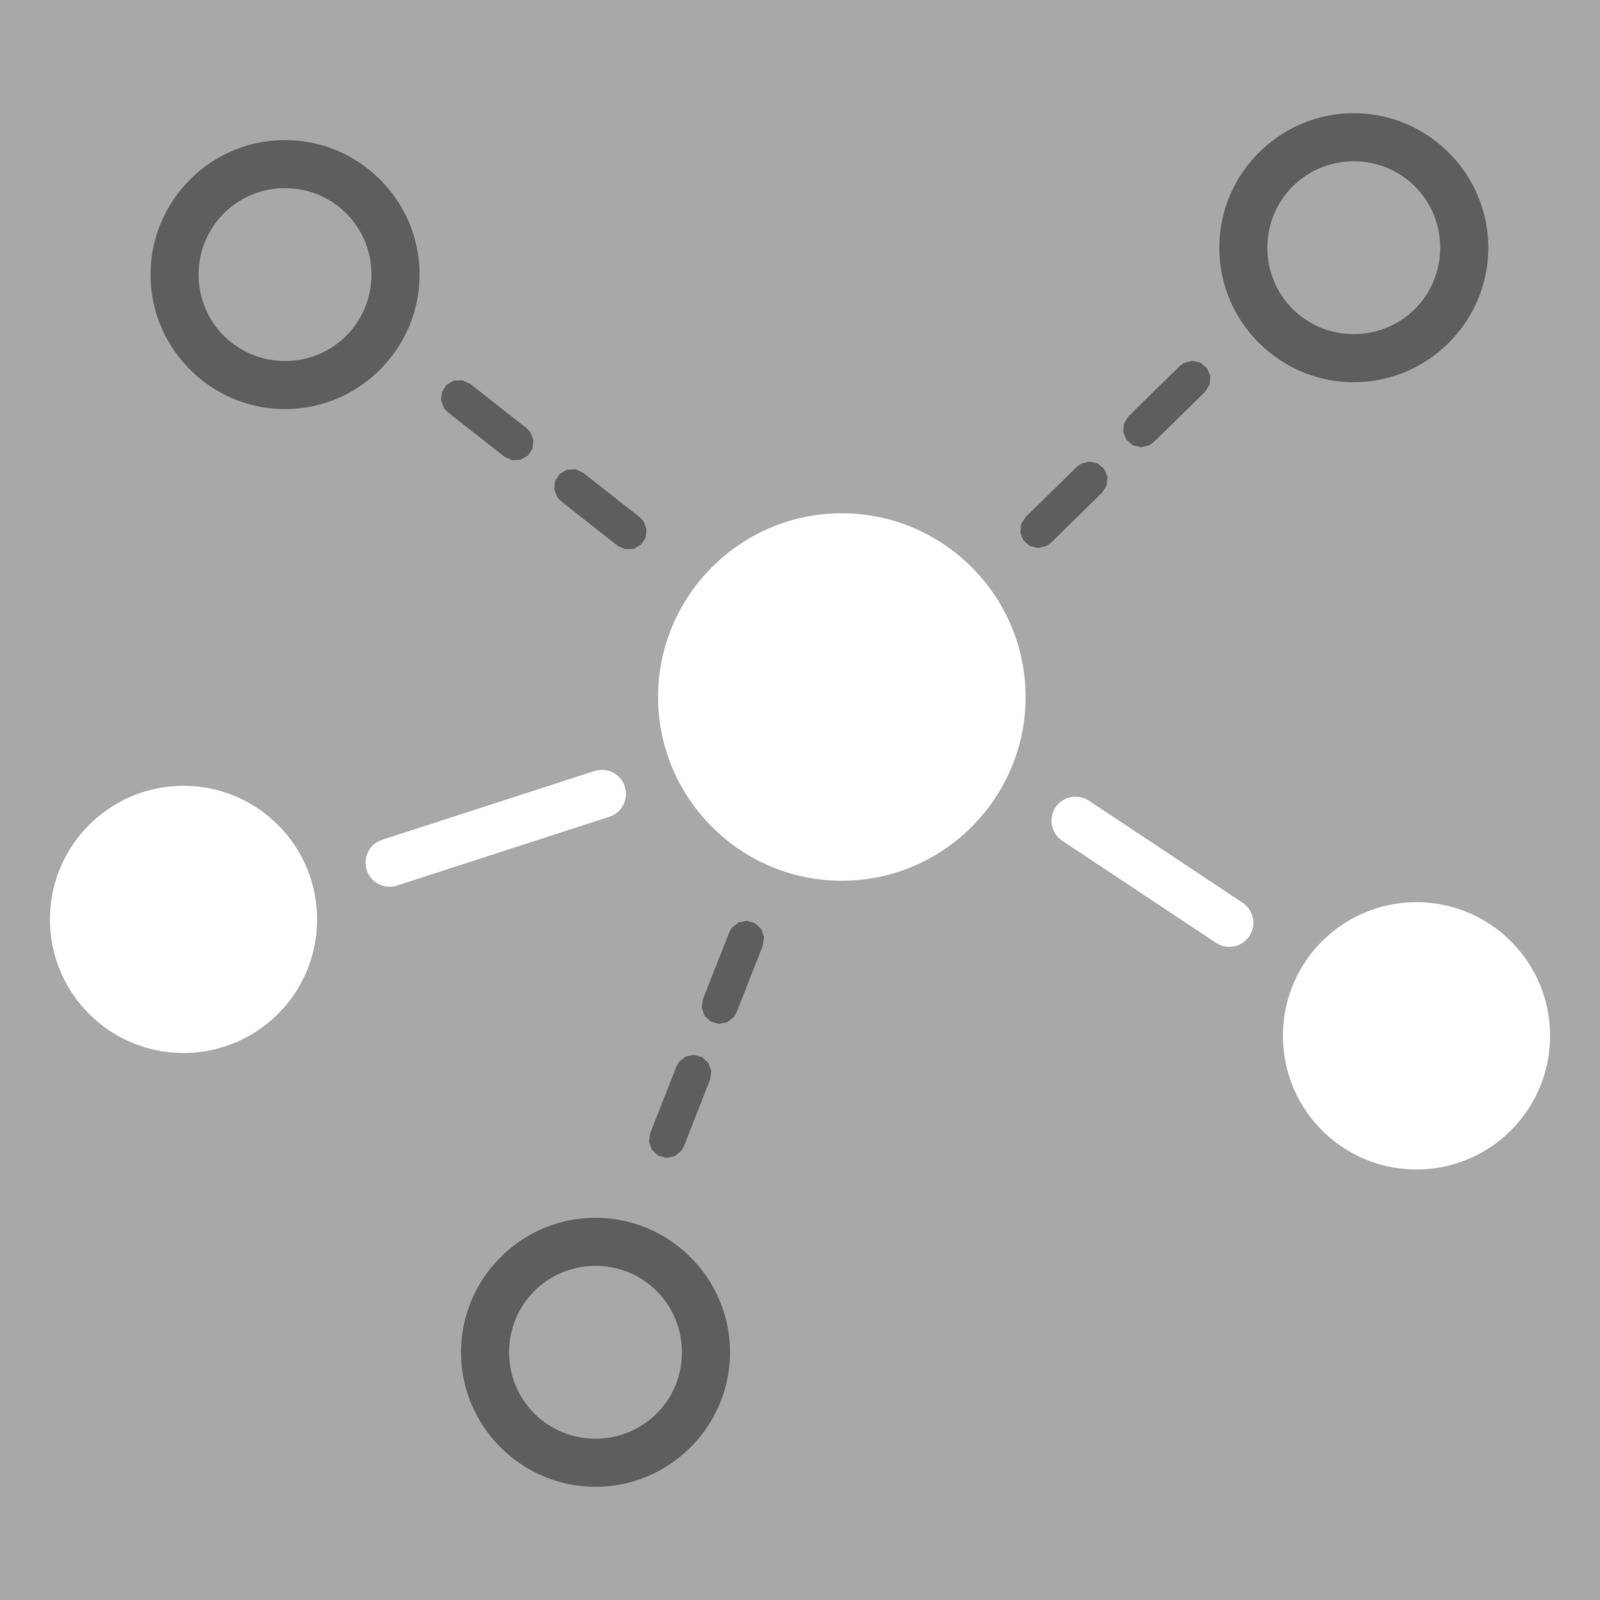 Structure icon. This flat vector symbol uses dark gray and white colors, rounded angles, and isolated on a silver background.